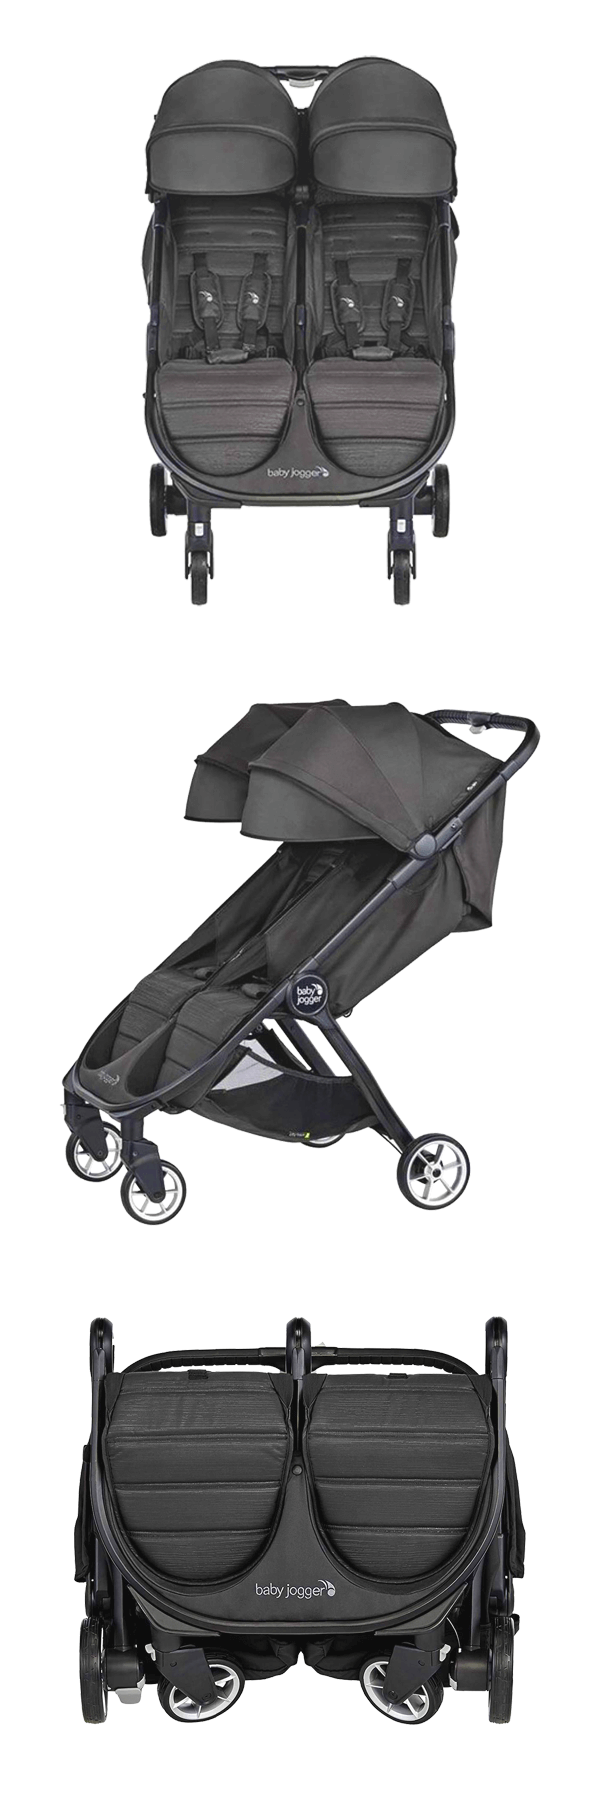 Stroller configurations of Baby Jogger City Tour 2 Double